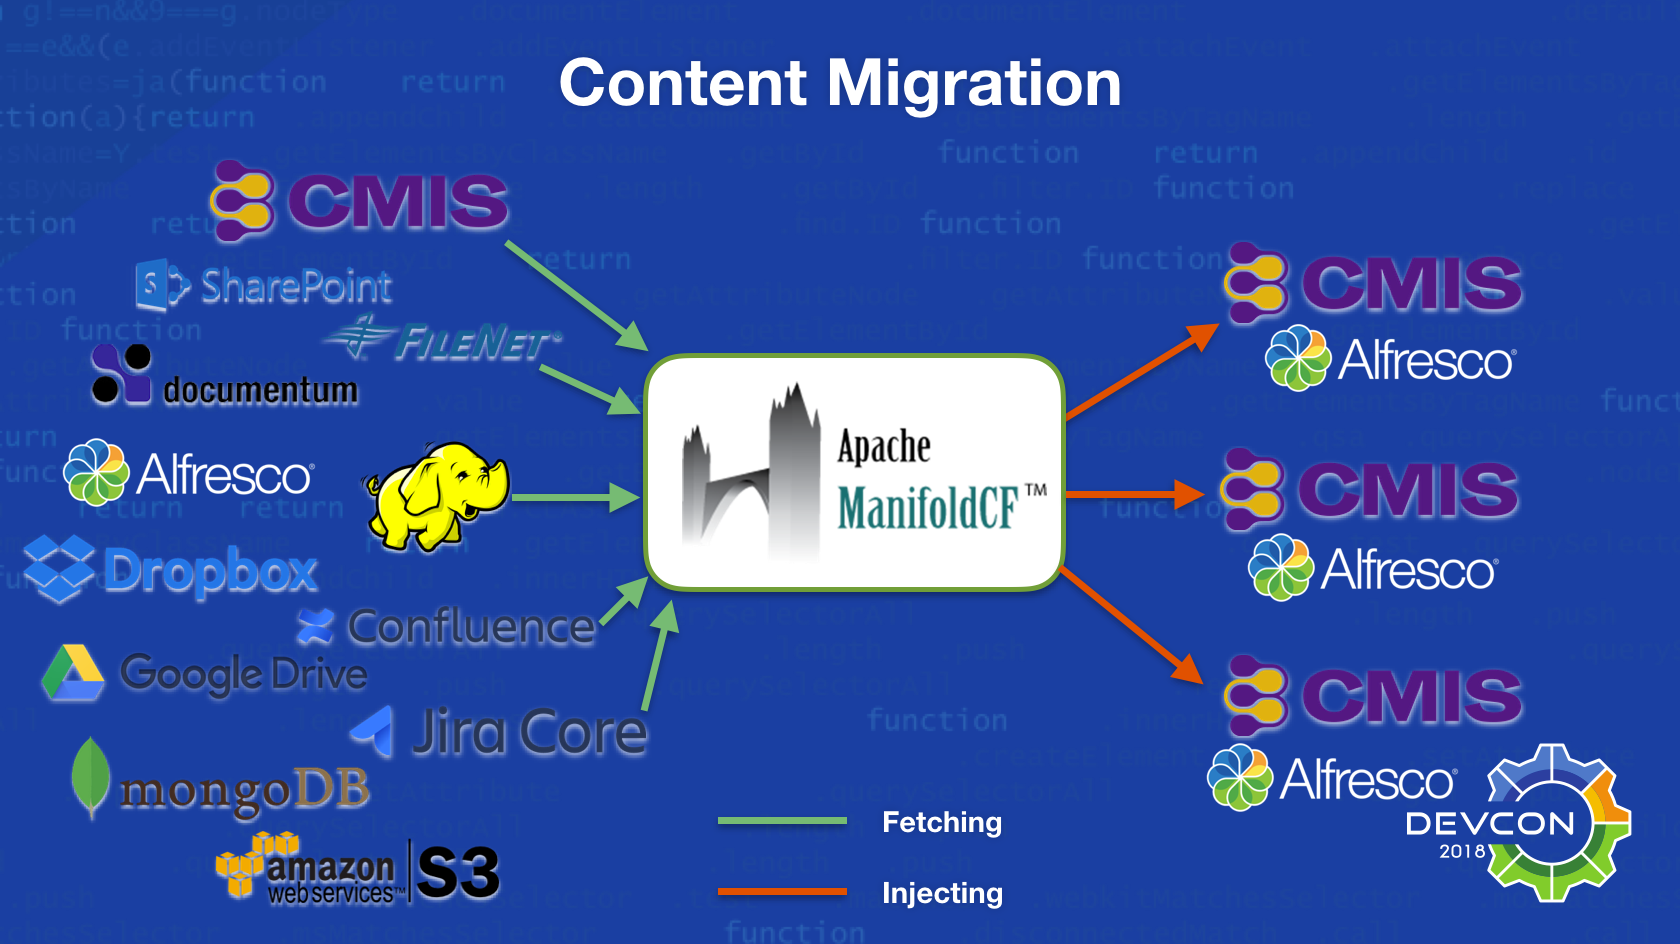 Migration architecture of the new Content Migration included in Apache ManifoldCF